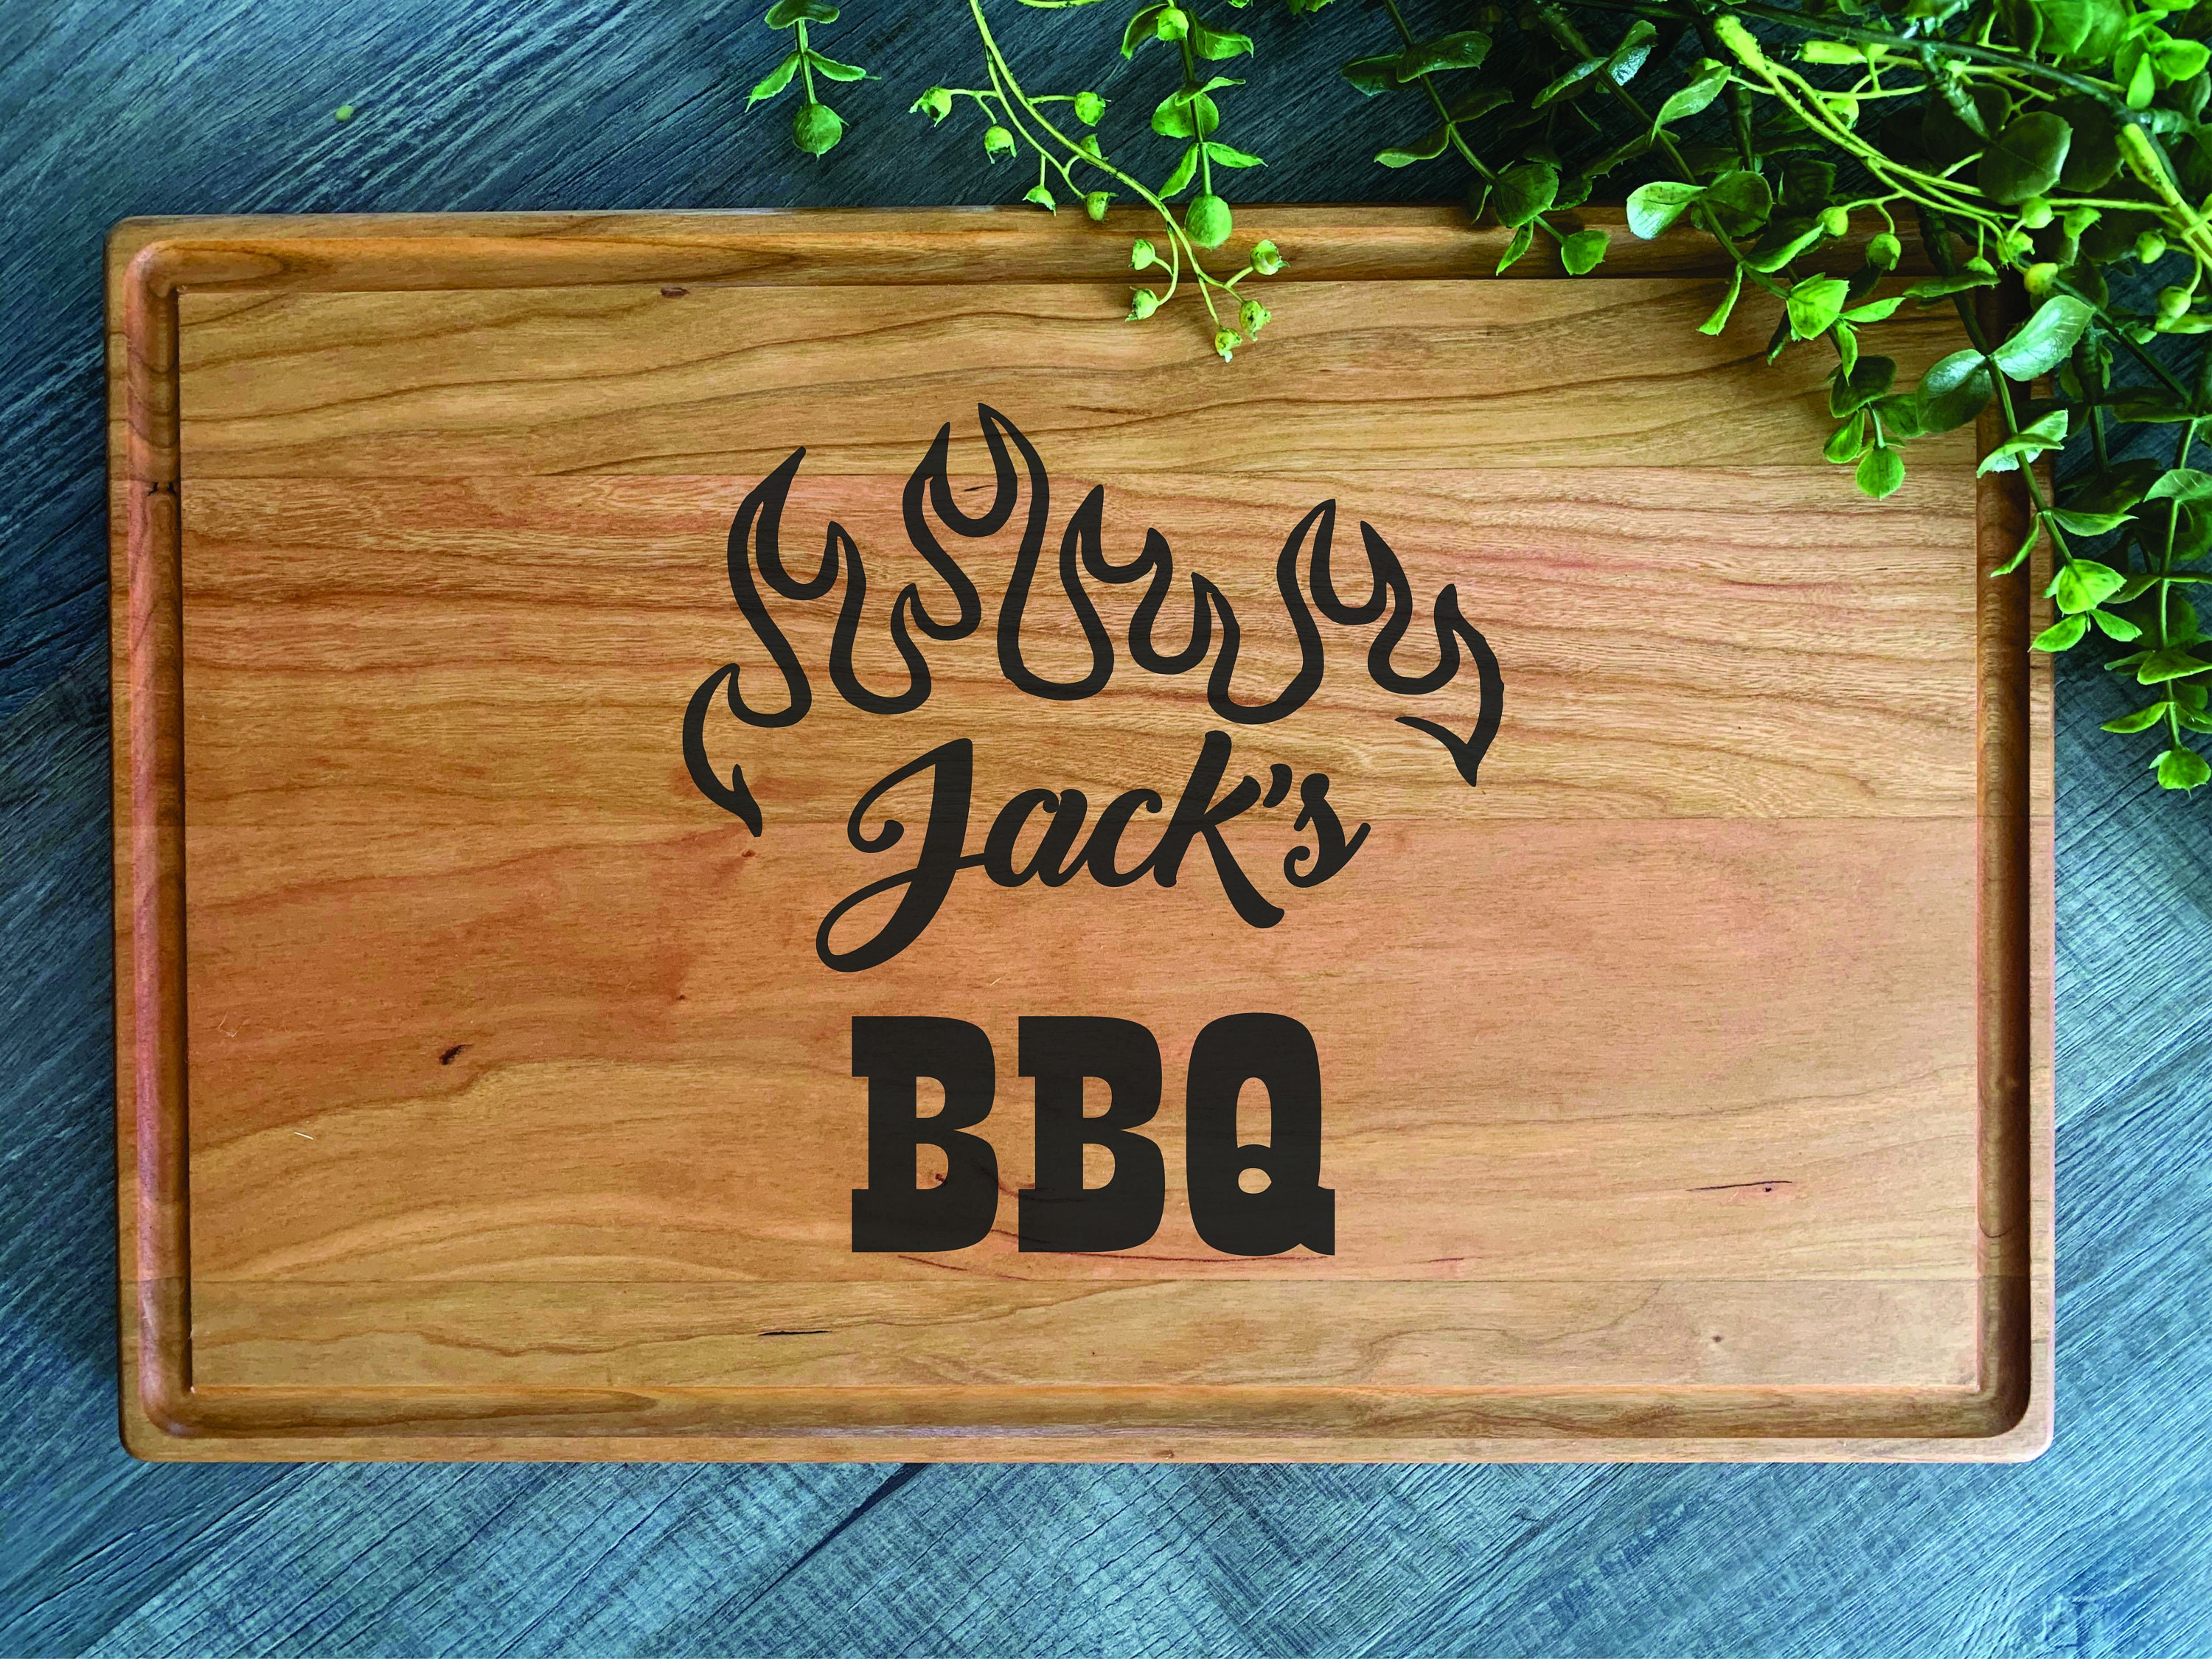 Large Cutting Board, Meat Diagram, Custom, Great Gift, Groomsman Gift,  Father's Day Gift, BBQ, Solid Wood, Walnut, Cherry, Oak, Hard Maple 